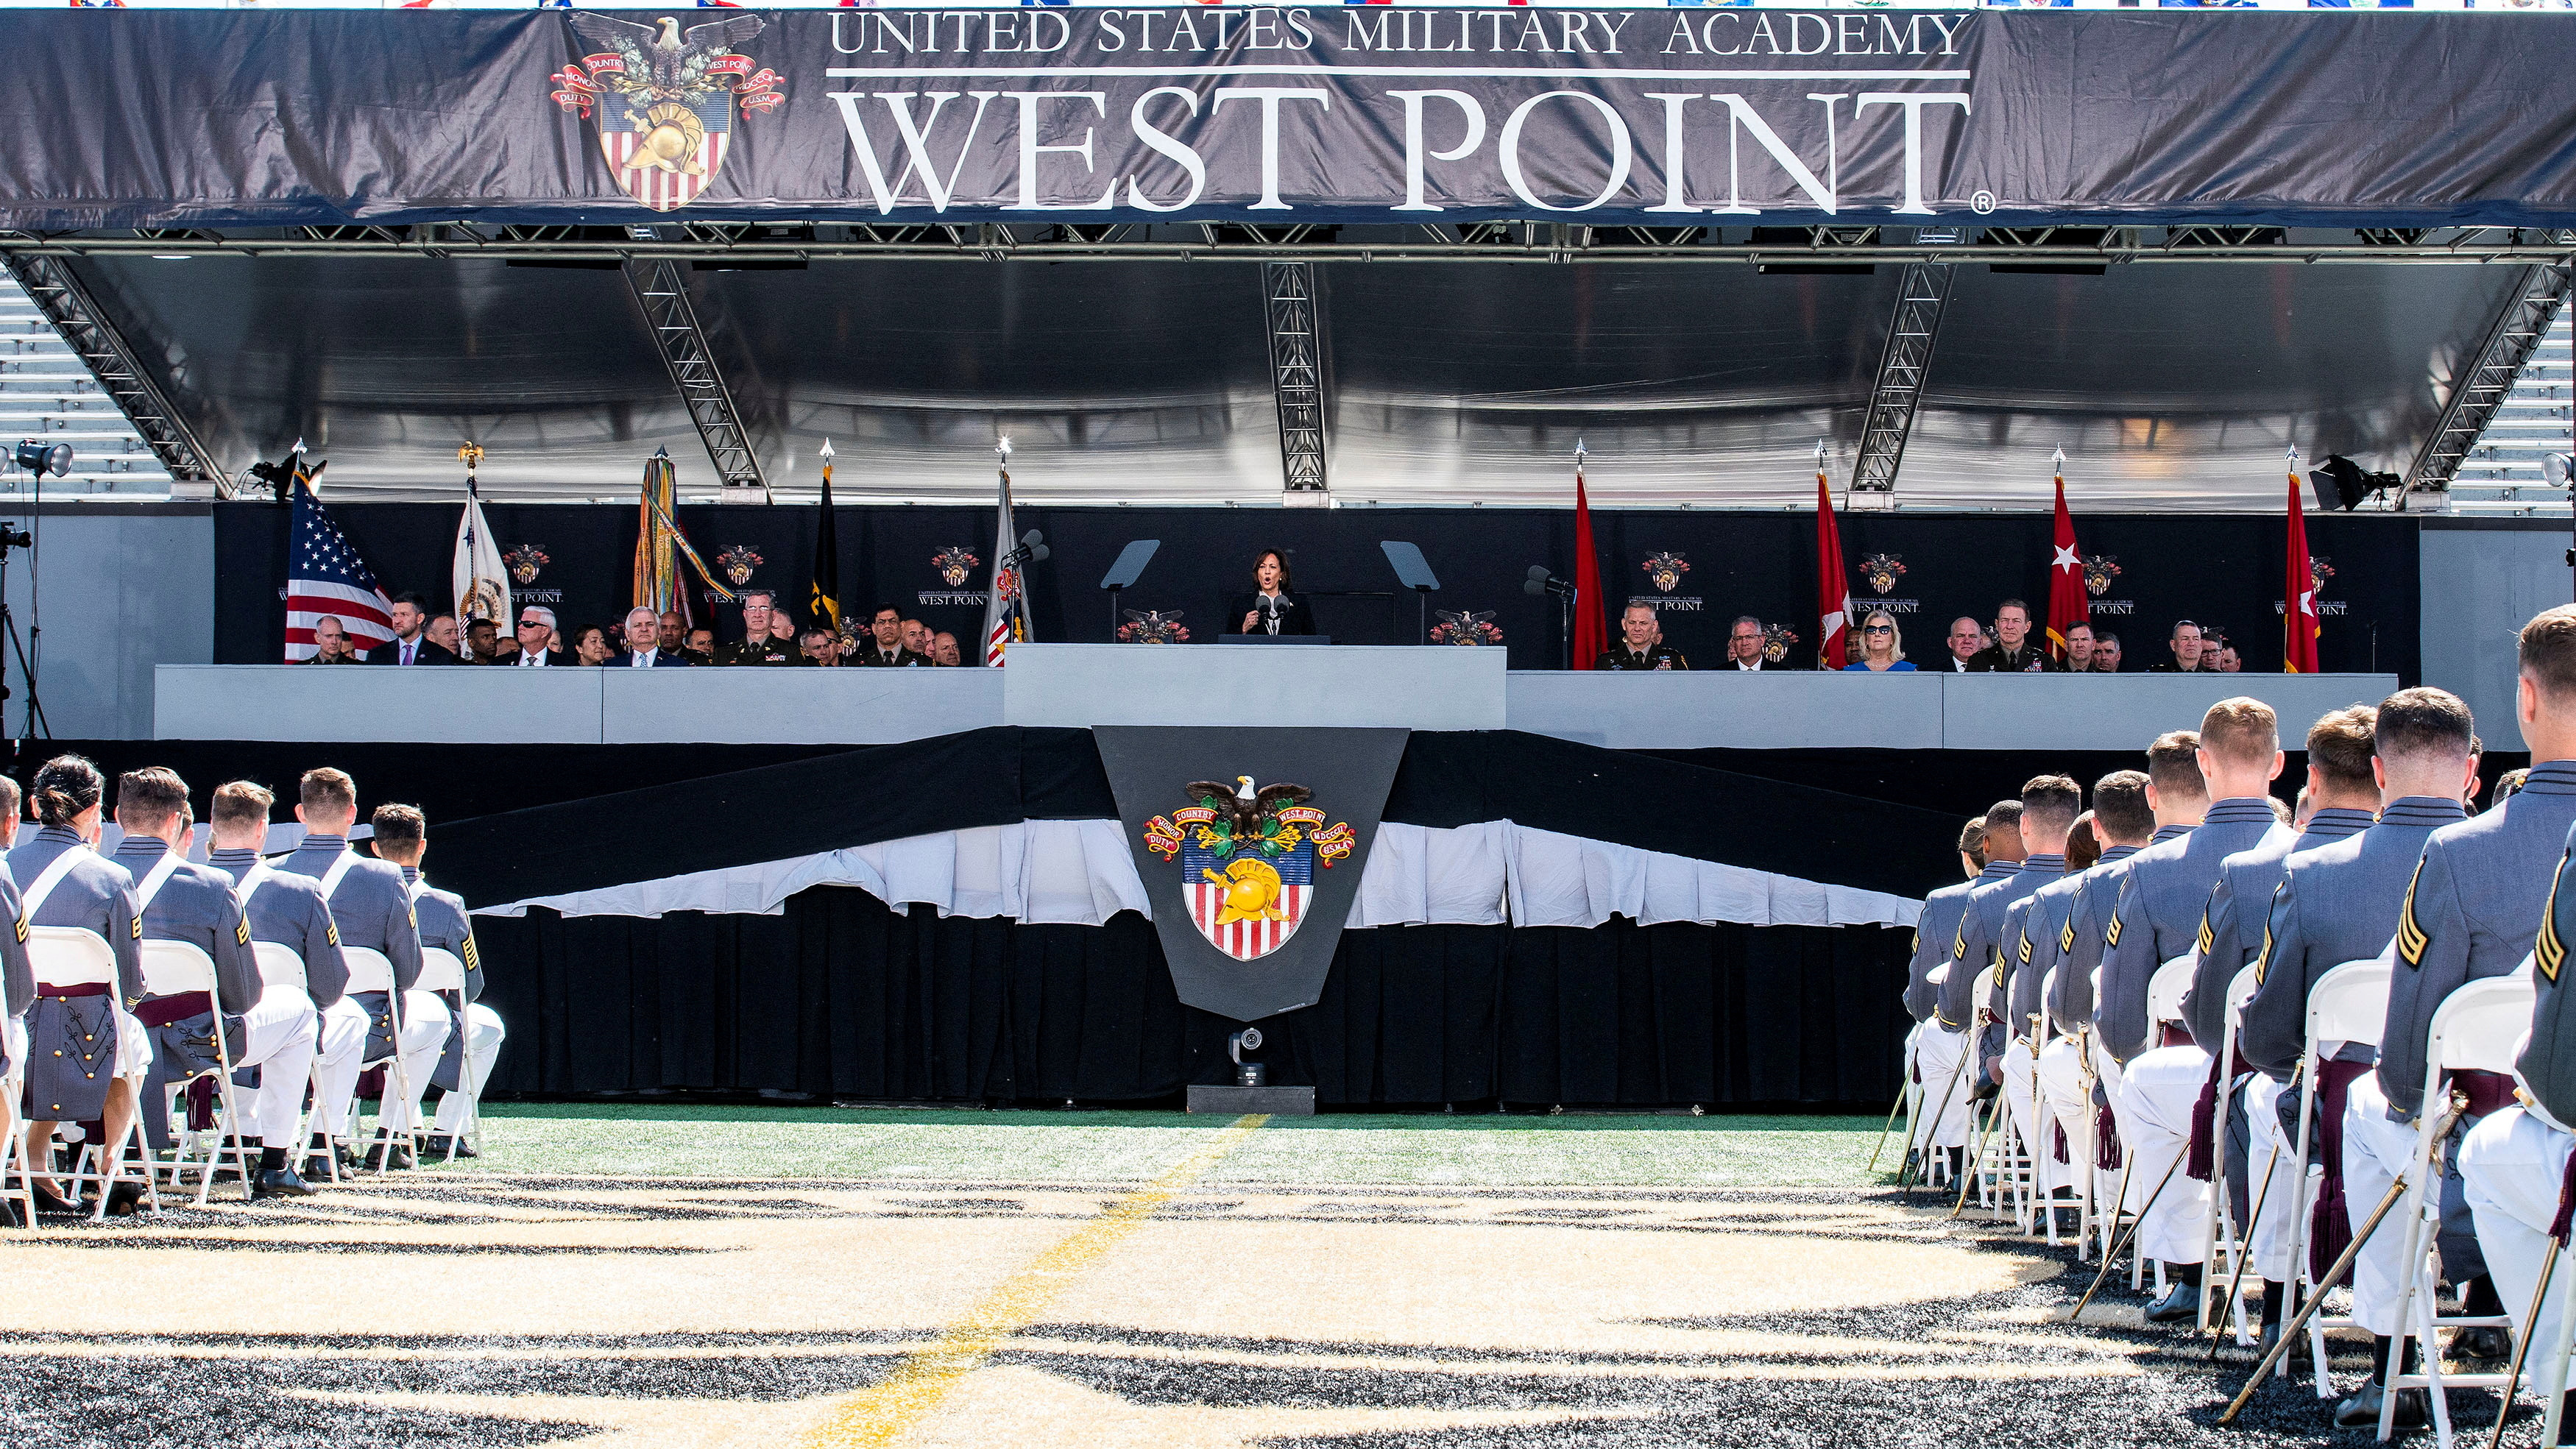 U.S. Vice President Harris attends the graduation ceremony at United States Military Academy (USMA), in West Point